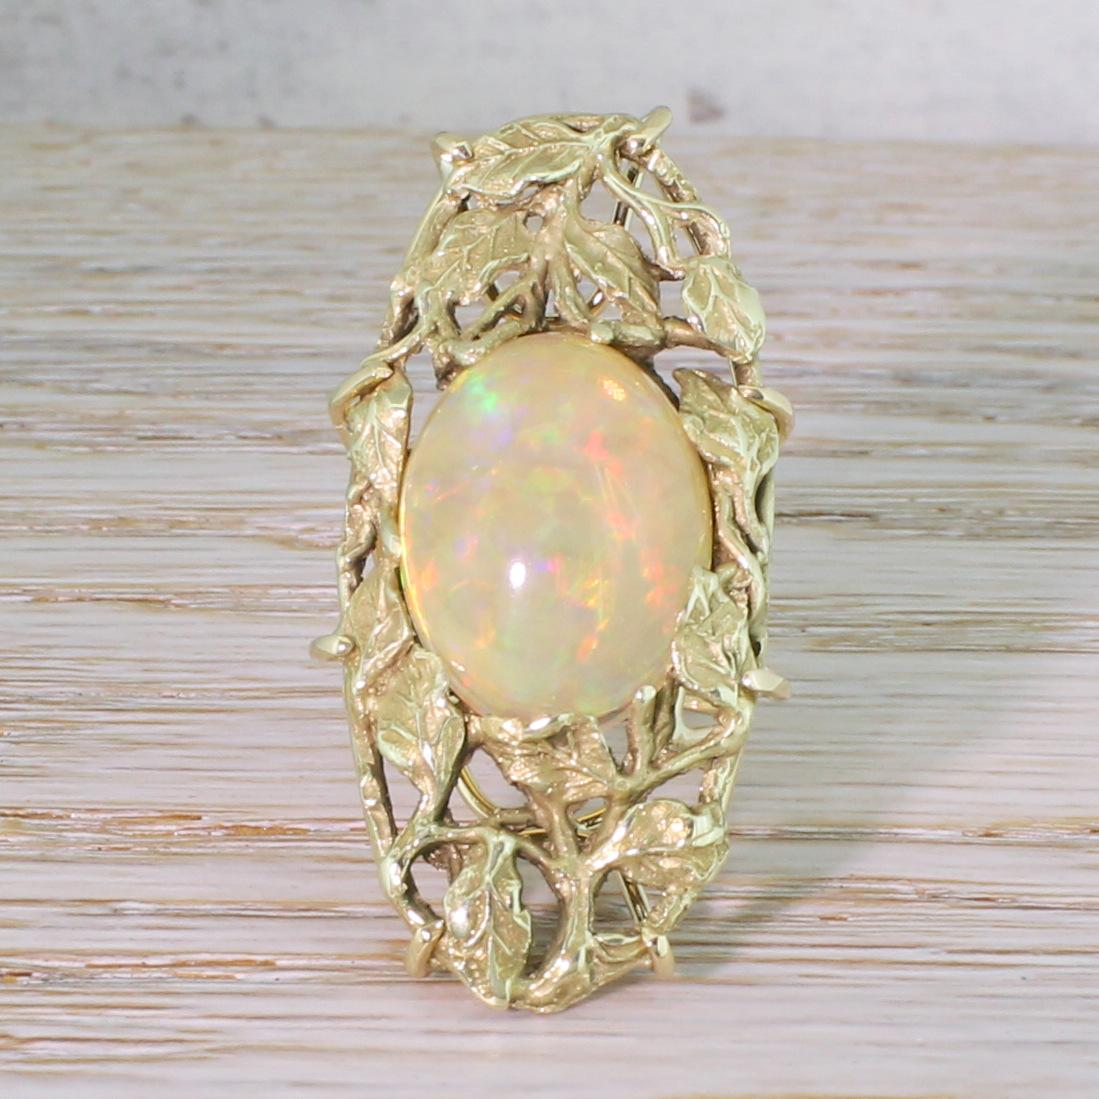 An awesome Art Nouveau ring. The glowing opal in the centre shows an impressive play of colour. The stone sits at the centre of a wonderfully crafted setting, with stunningly intricate foliate detailing. The top of the ring appears to have started